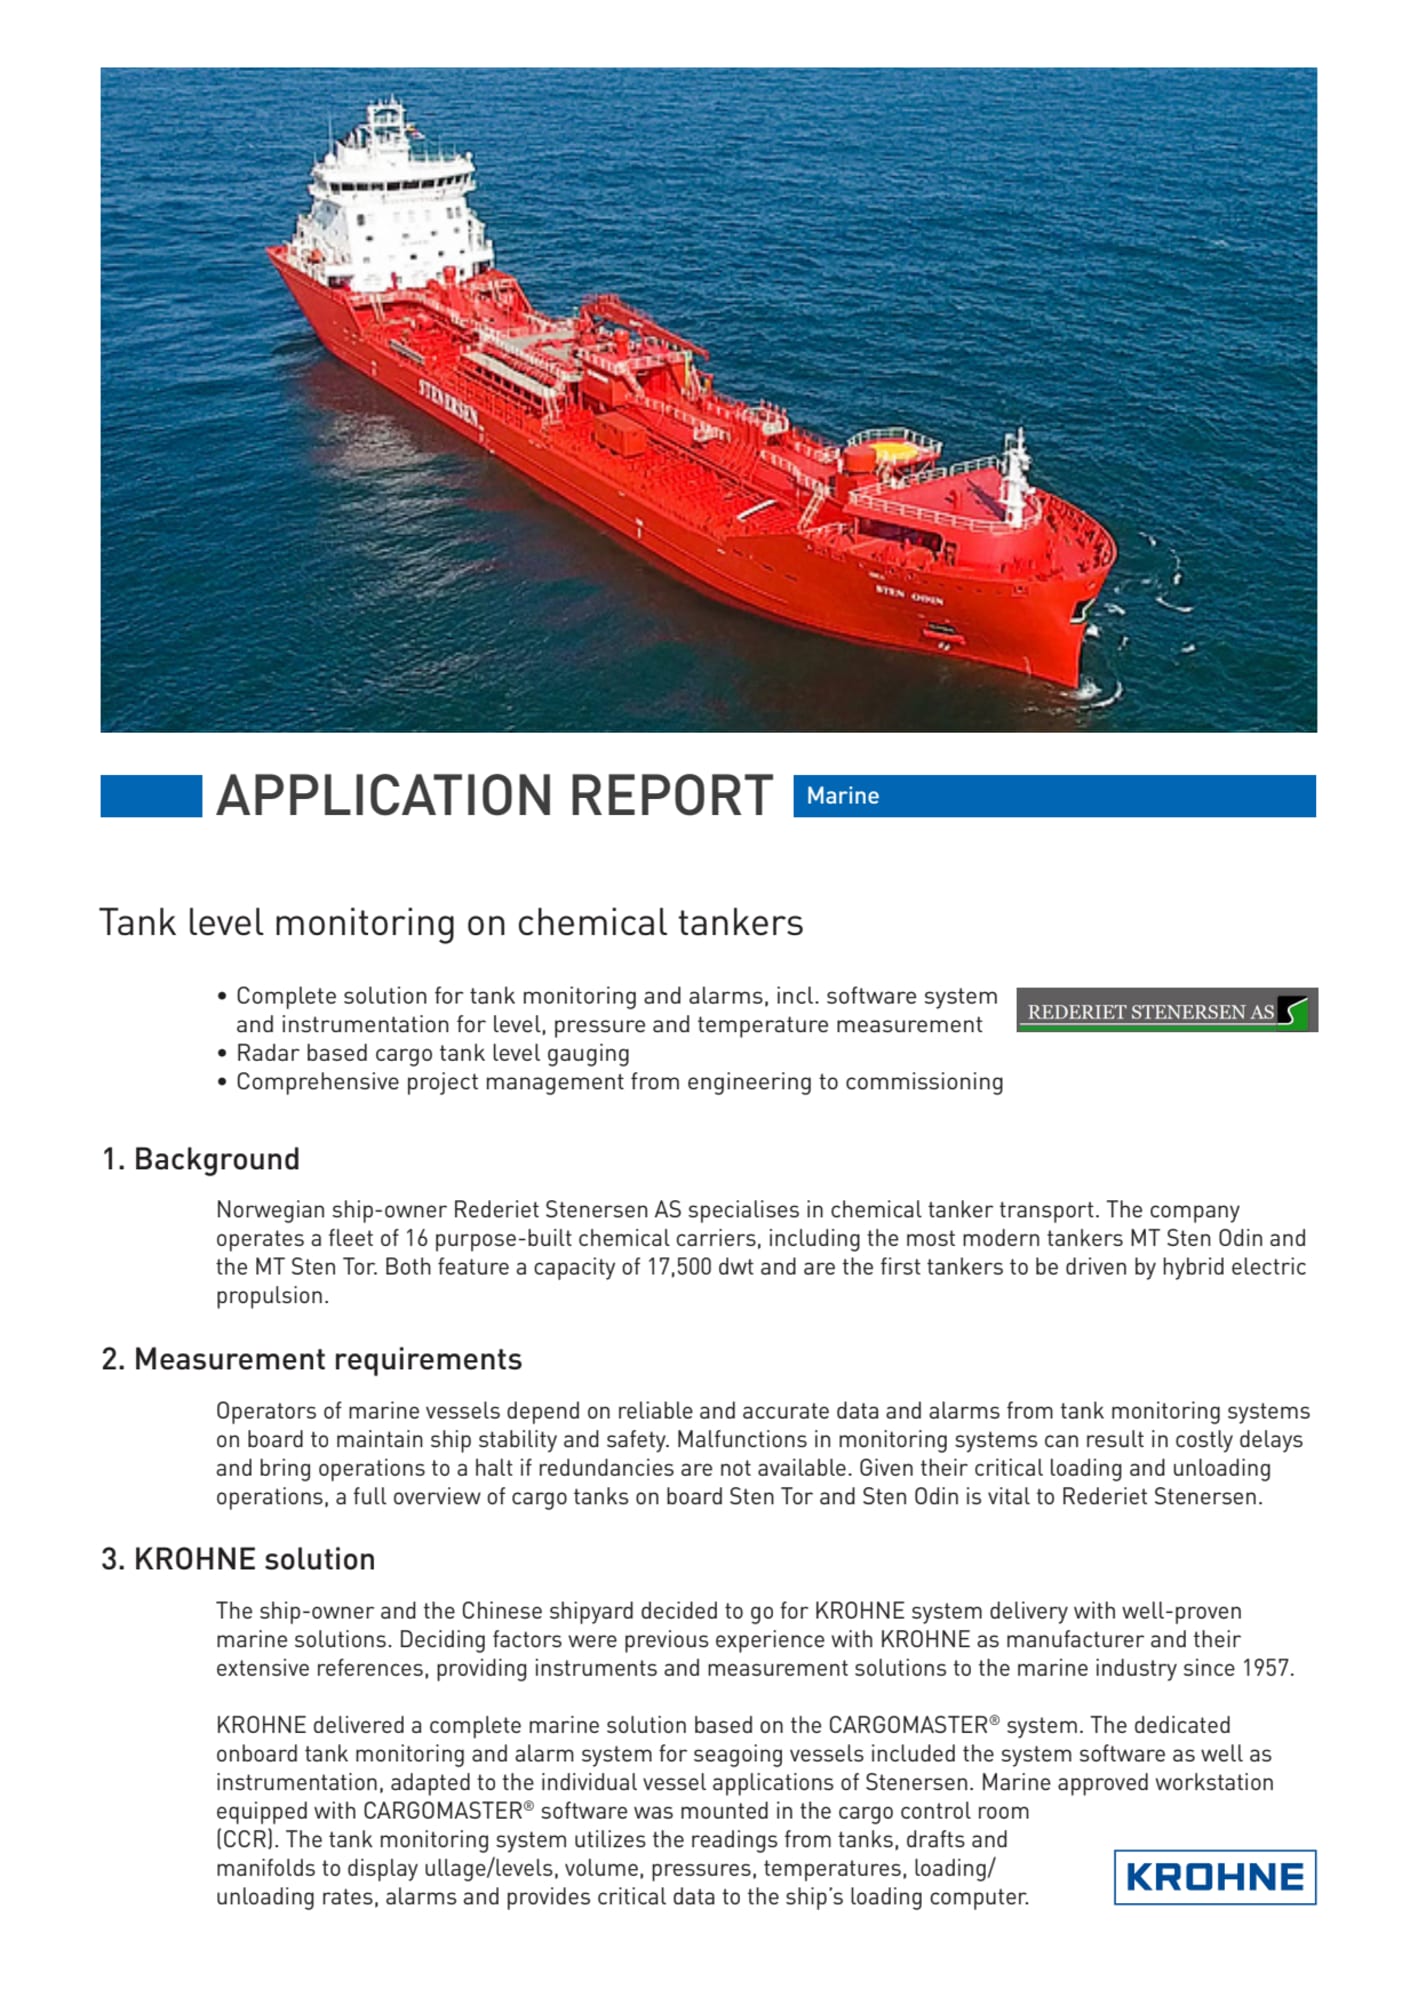 Tank level monitoring on chemical tankers Krohne Applications